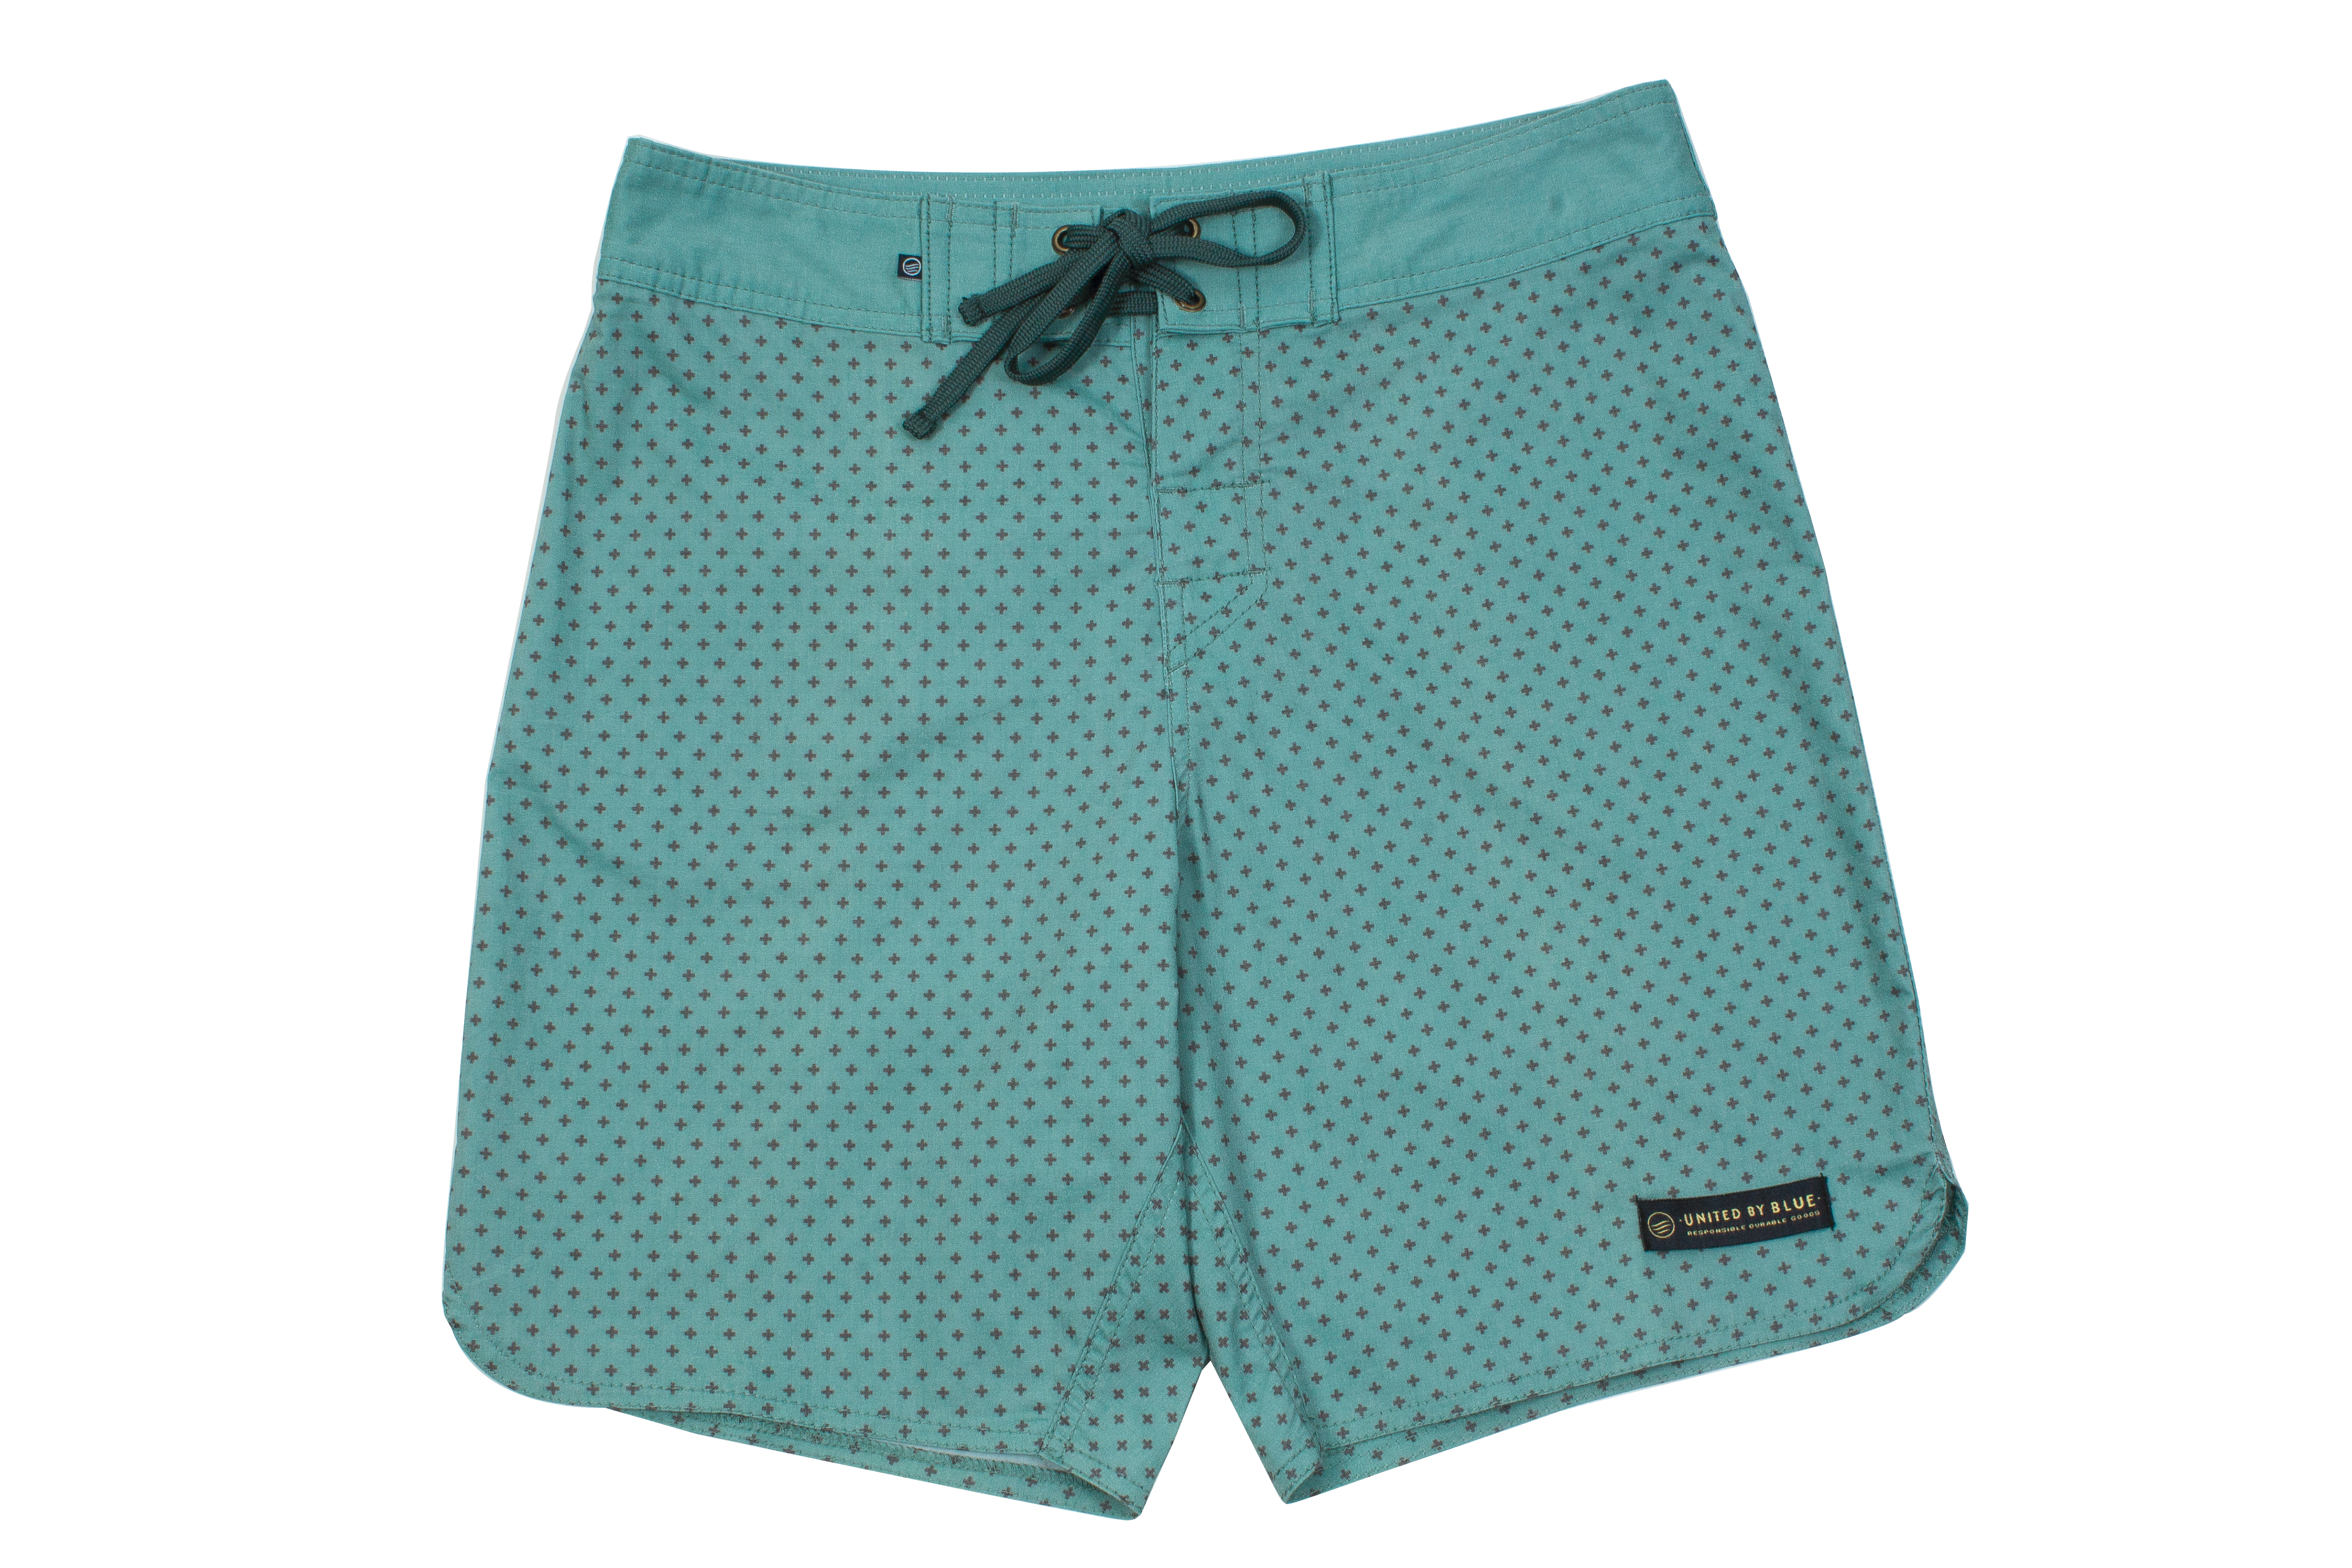 United by Blue &quot;Confluence Boardshorts&quot; in &quot;green cross dot,&quot; $68 at Hooley